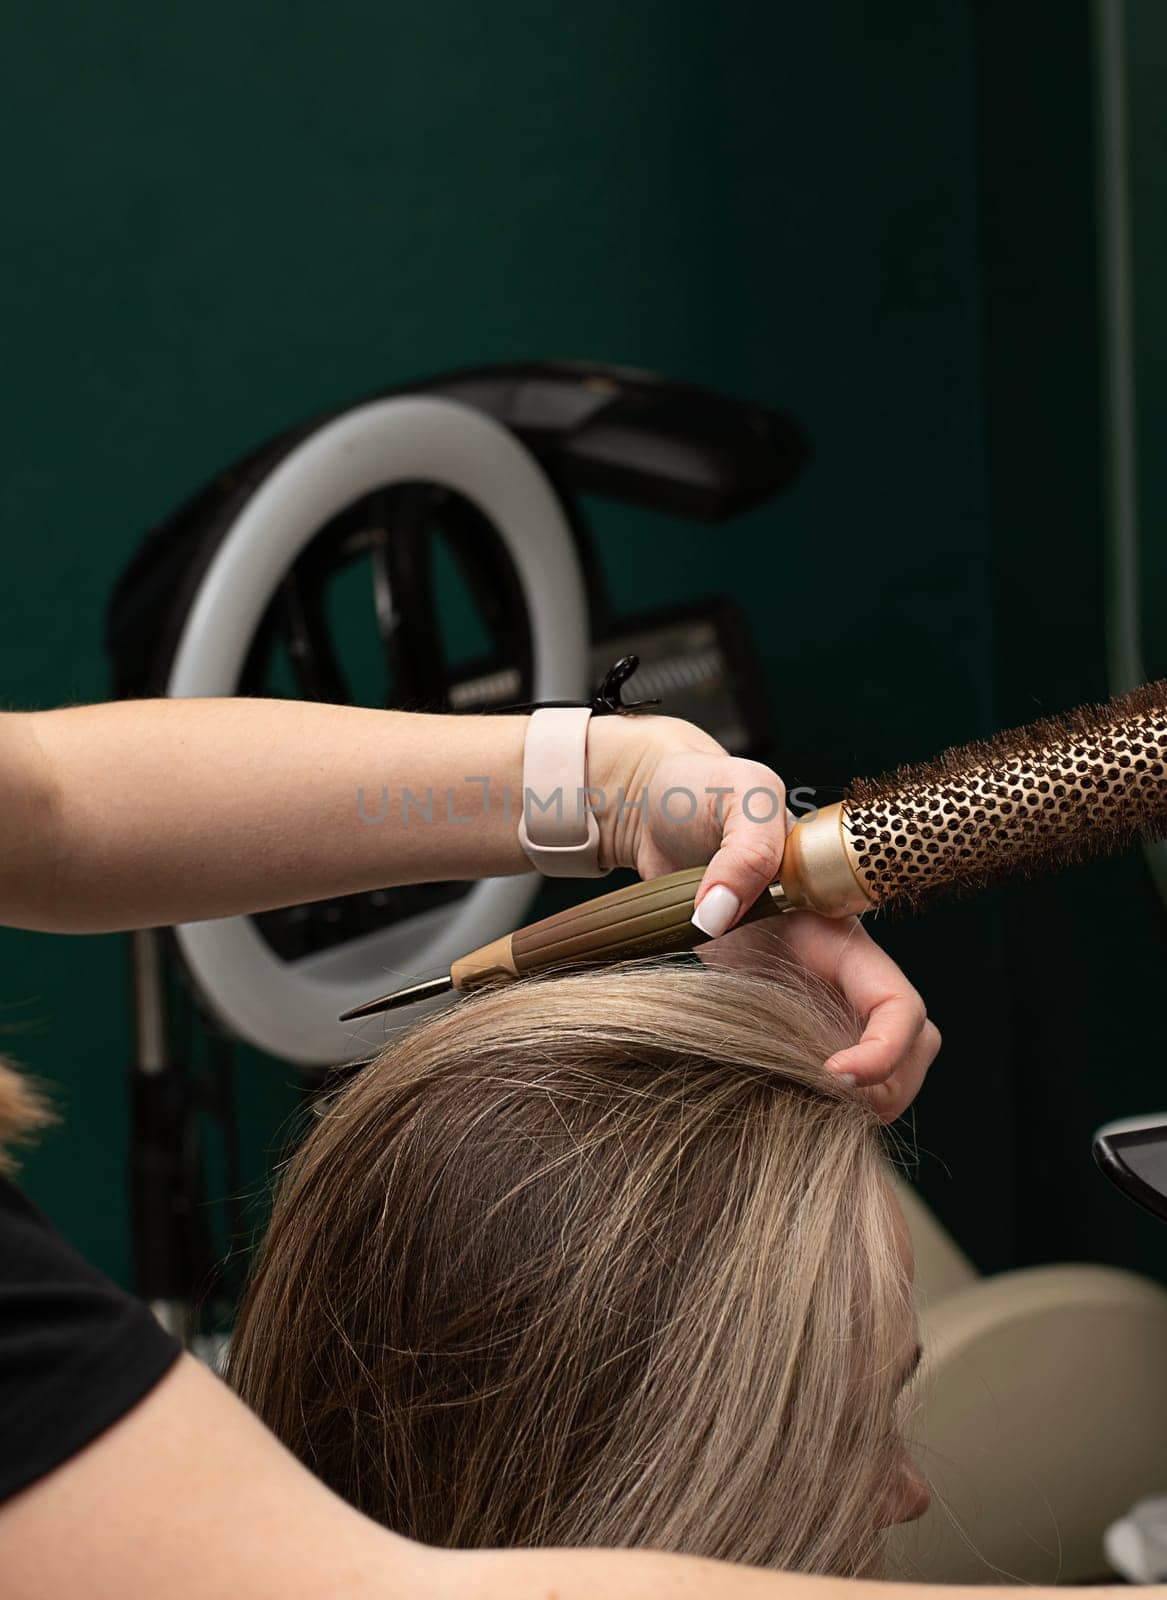 Beauty sphere. The master hairdresser does styling and combing the hair. Combs a client's long hair with a round brush and blow-dries it in a beauty salon. Close-up. Business concept. by ketlit